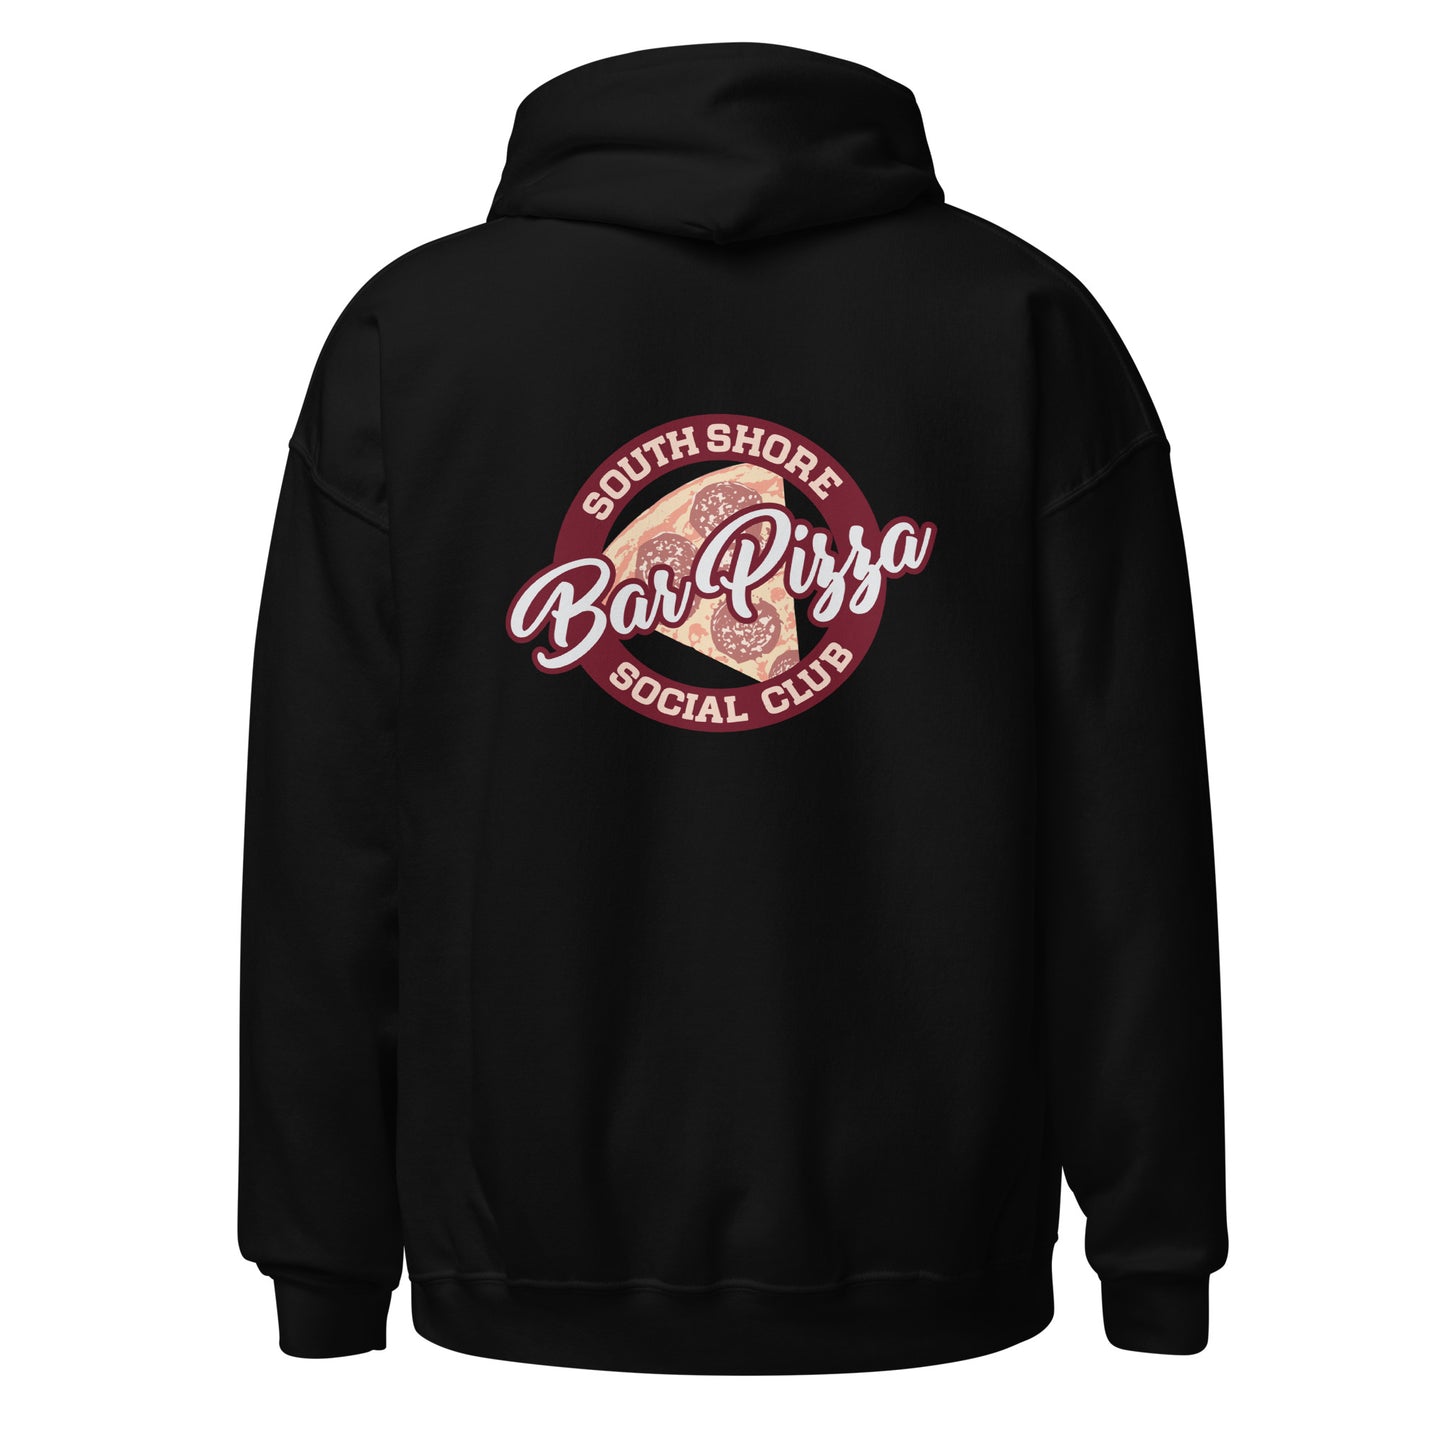 South South Bar Pizza Social Club Hoodie - State Logo Front - SSBPSC Logo on Back